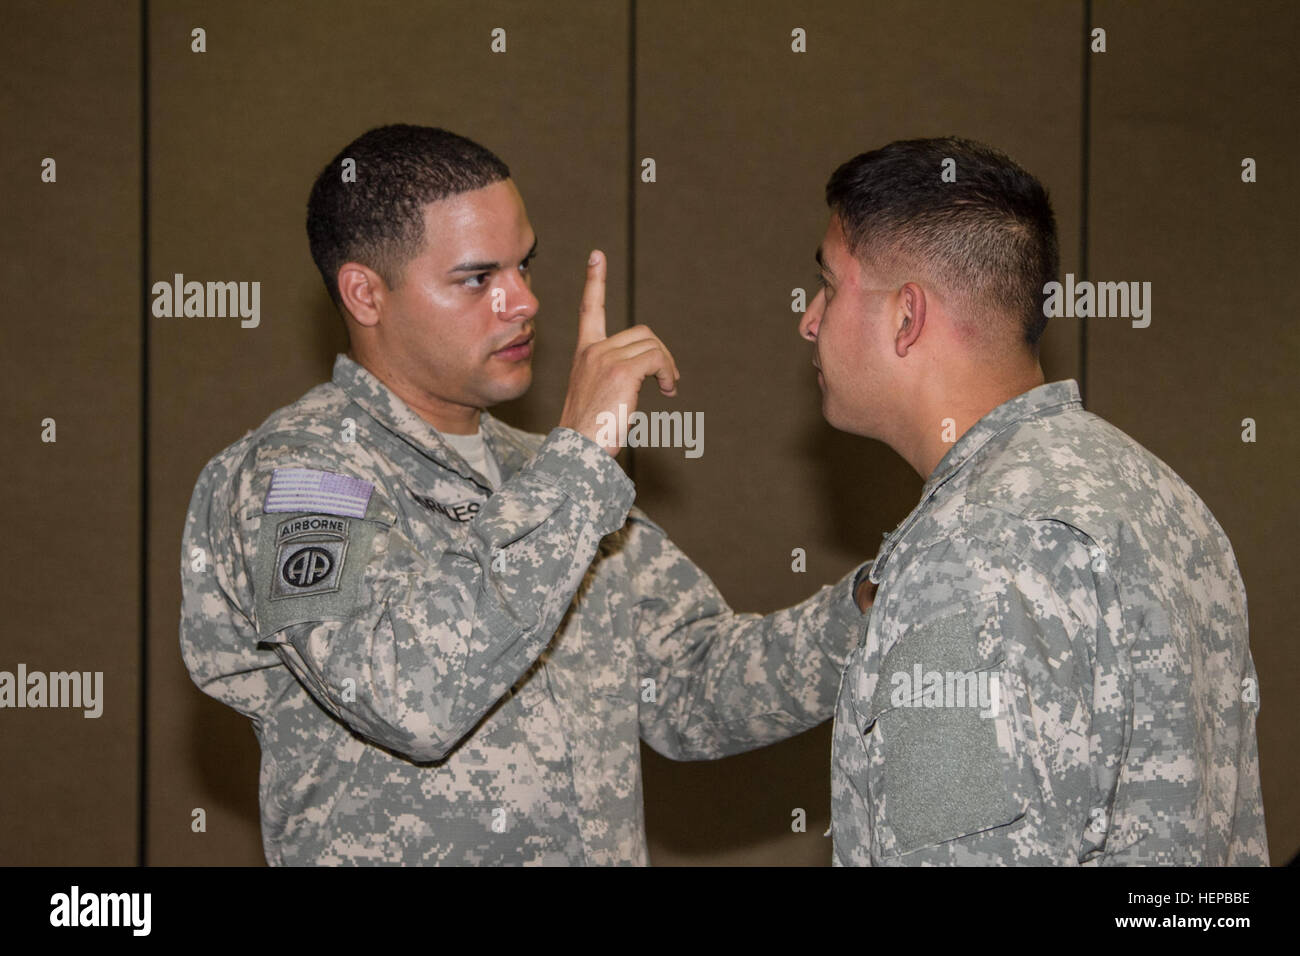 A Soldier from the 2nd Combat Aviation Brigade checks a trainee after he is done fighting April 22, at the Super Gym on Camp Humphreys. They had to make sure the trainees were OK to continue after certain parts of the training. Ready to fight tonight 042215-A-TU438-003 Stock Photo